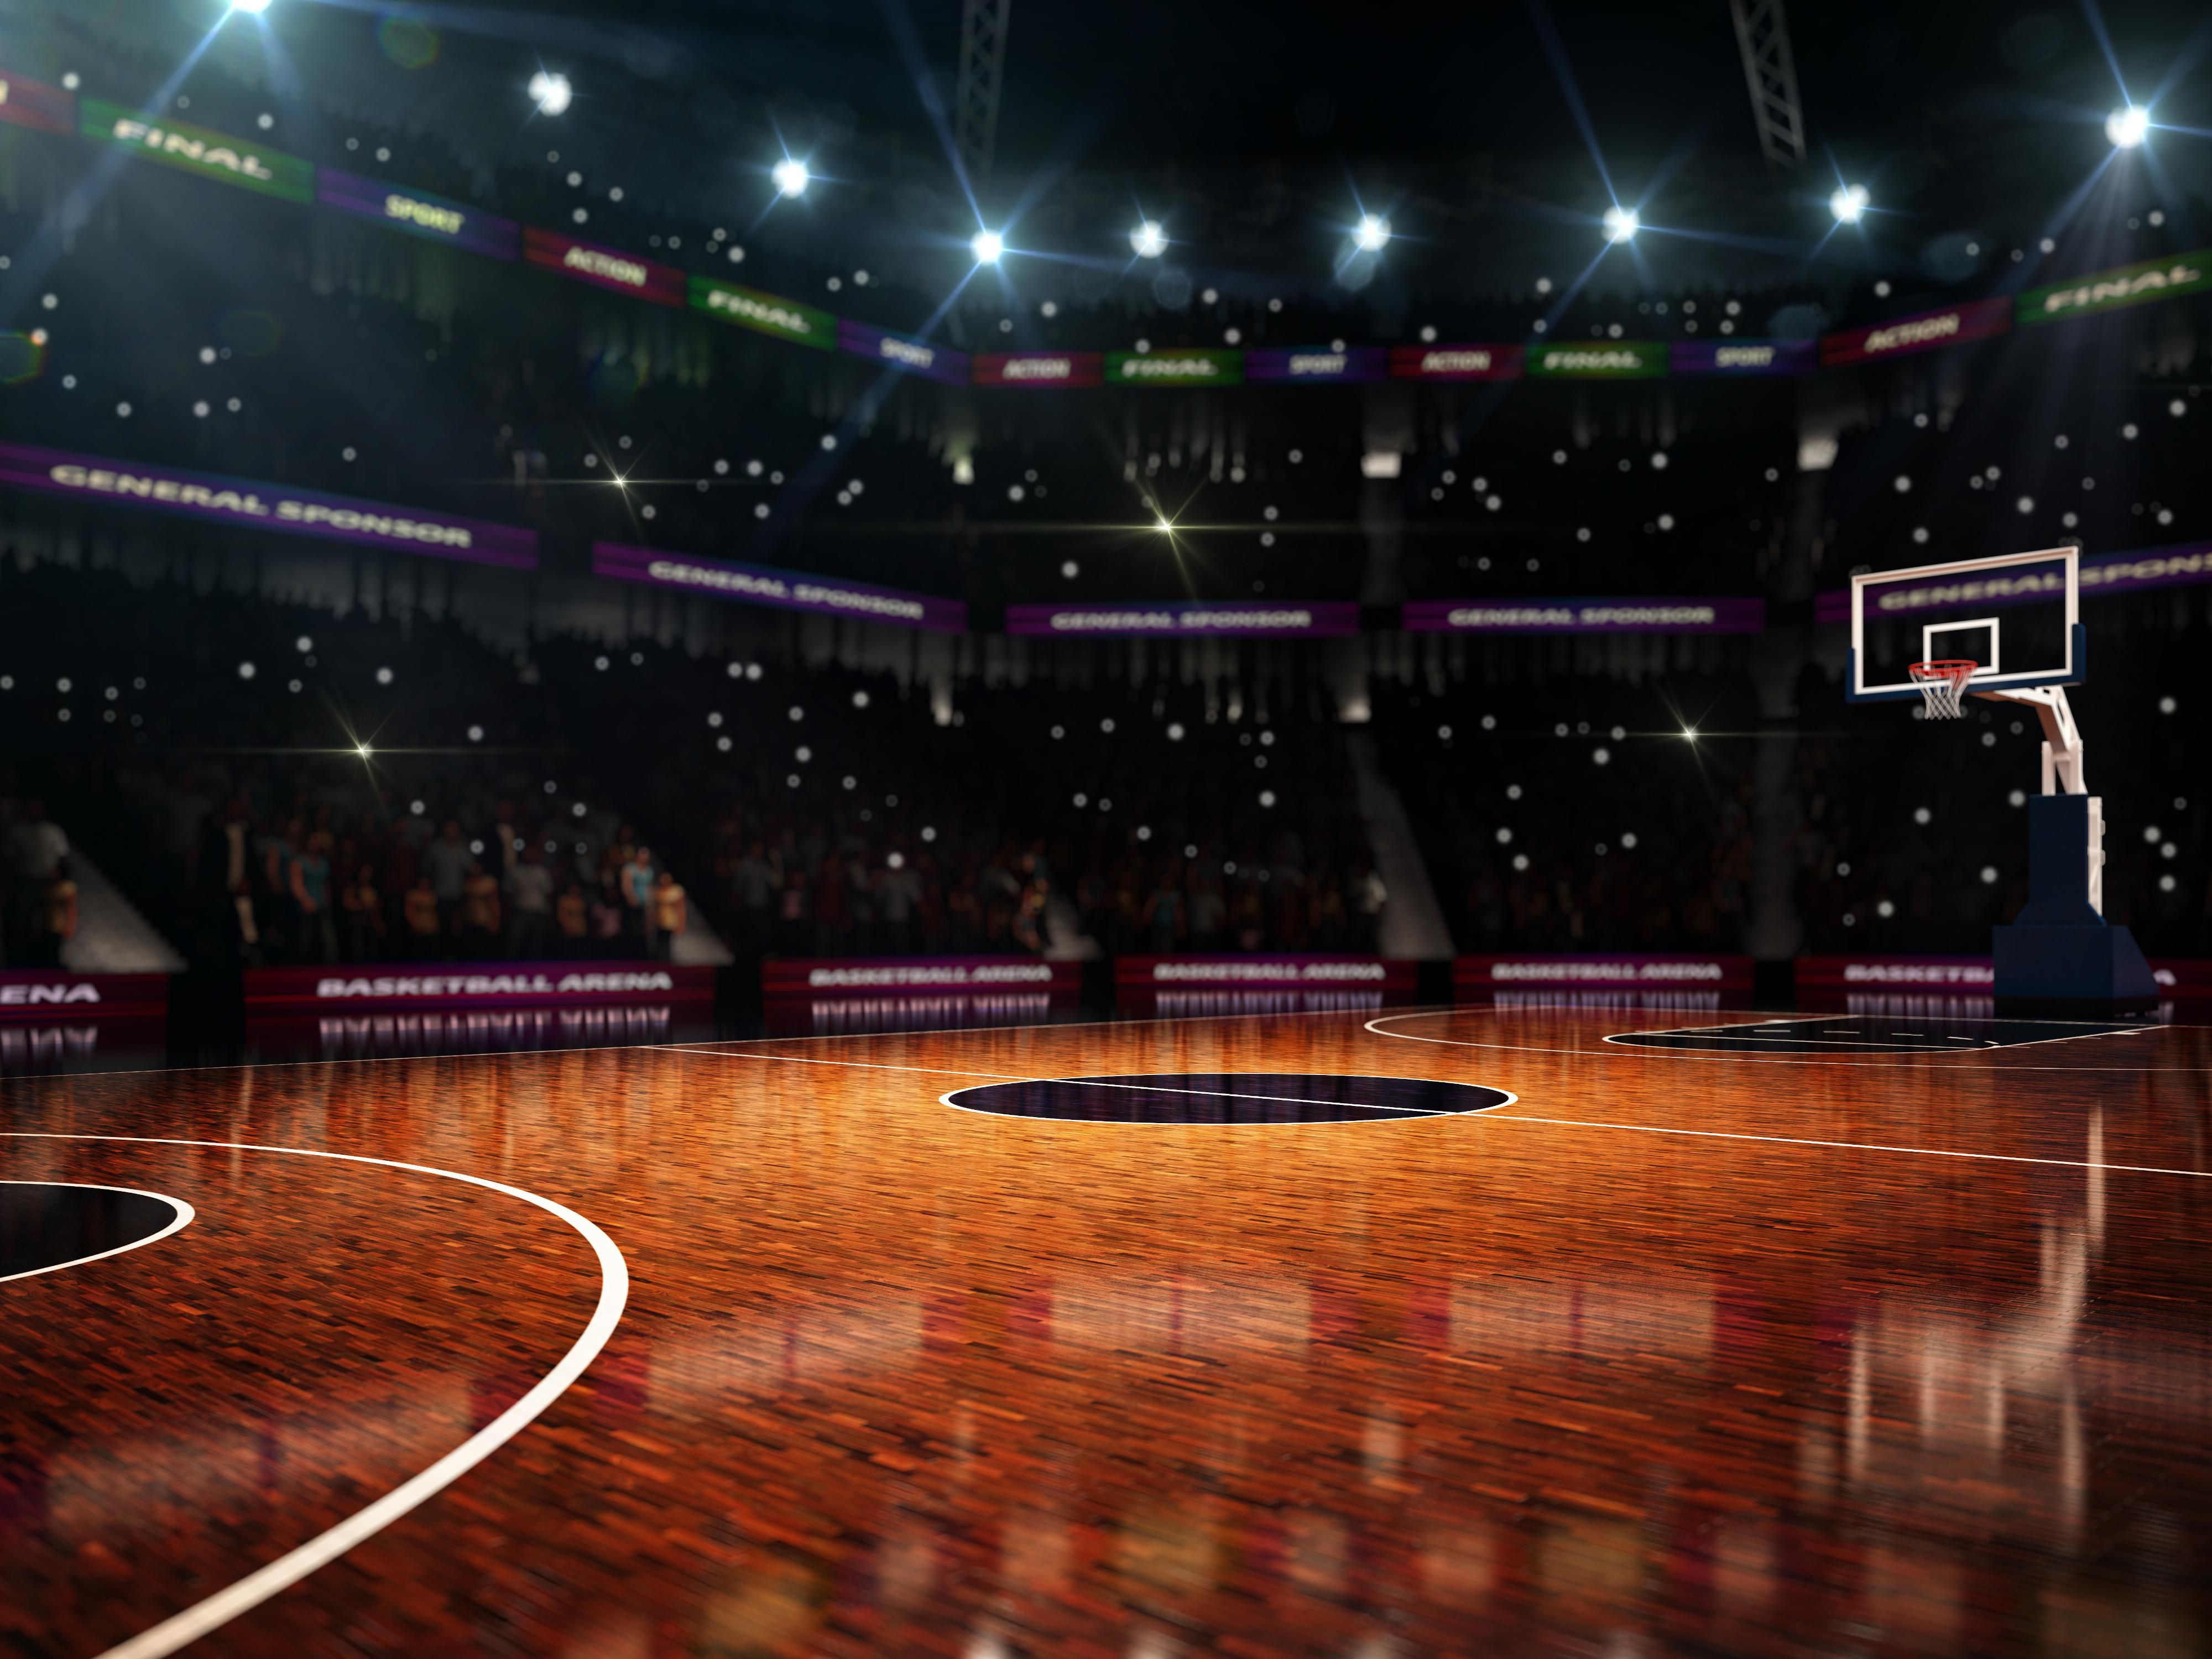 Home to the Brooklyn Nets and host to concerts, college basketball and much more, Barclays Center is a 20-minute train ride away. Stay with us while you cheer on your favorite team or listen to your favorite performance artist. Book your room with us today!